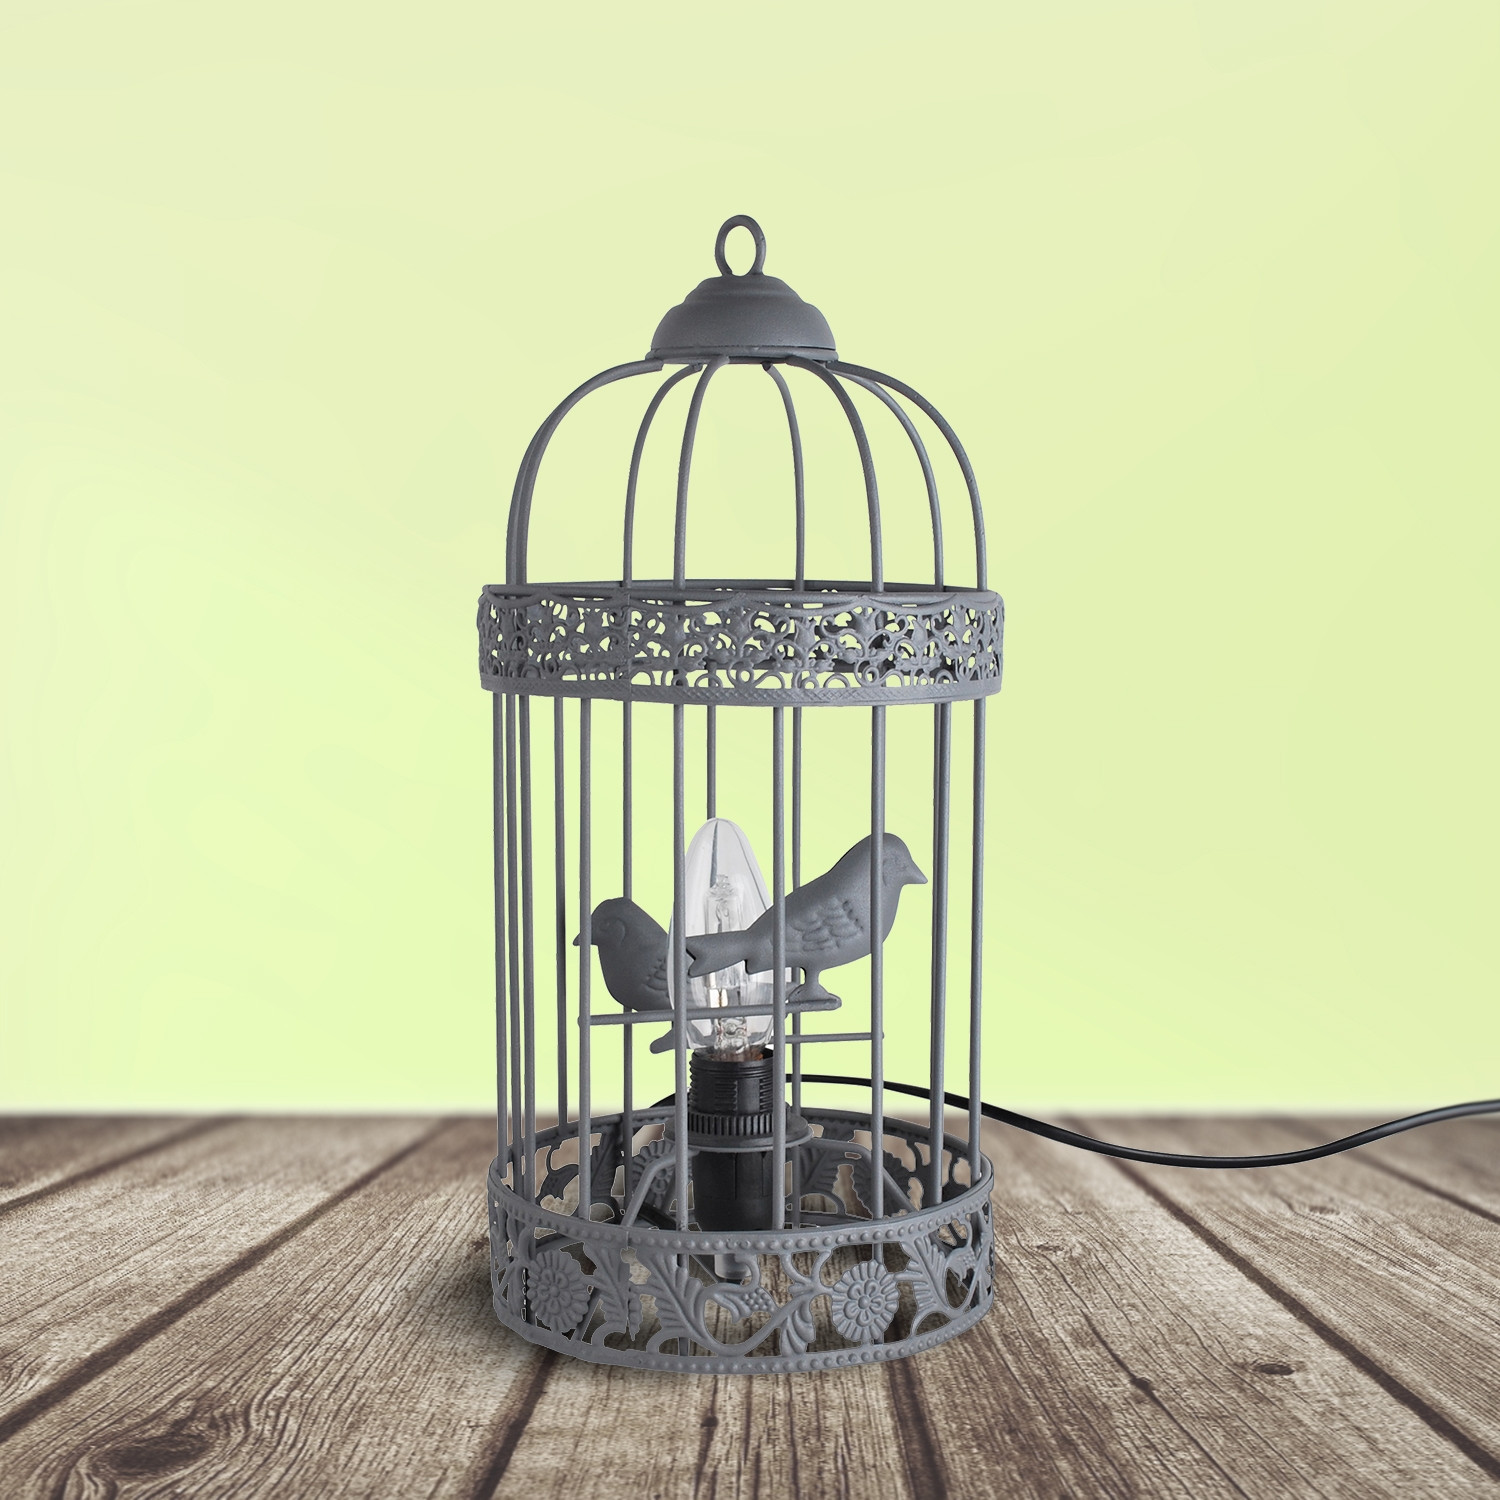 Shabby Chic Bedroom Lamps
 Shabby Chic Grey Birdcage Table Lamp Bedside Light